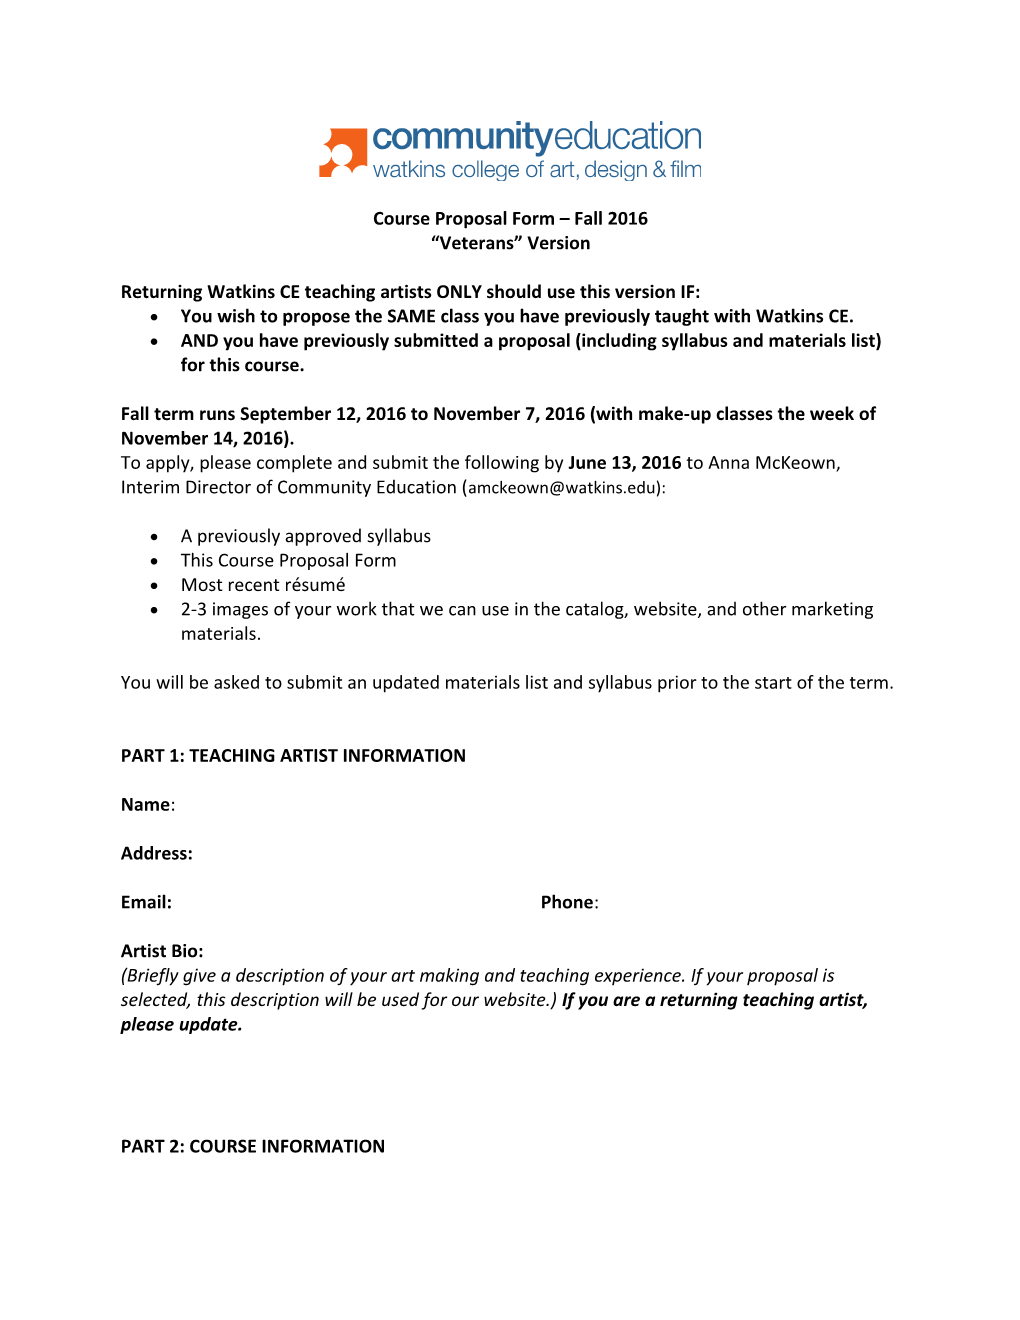 Course Proposal Form Fall 2016